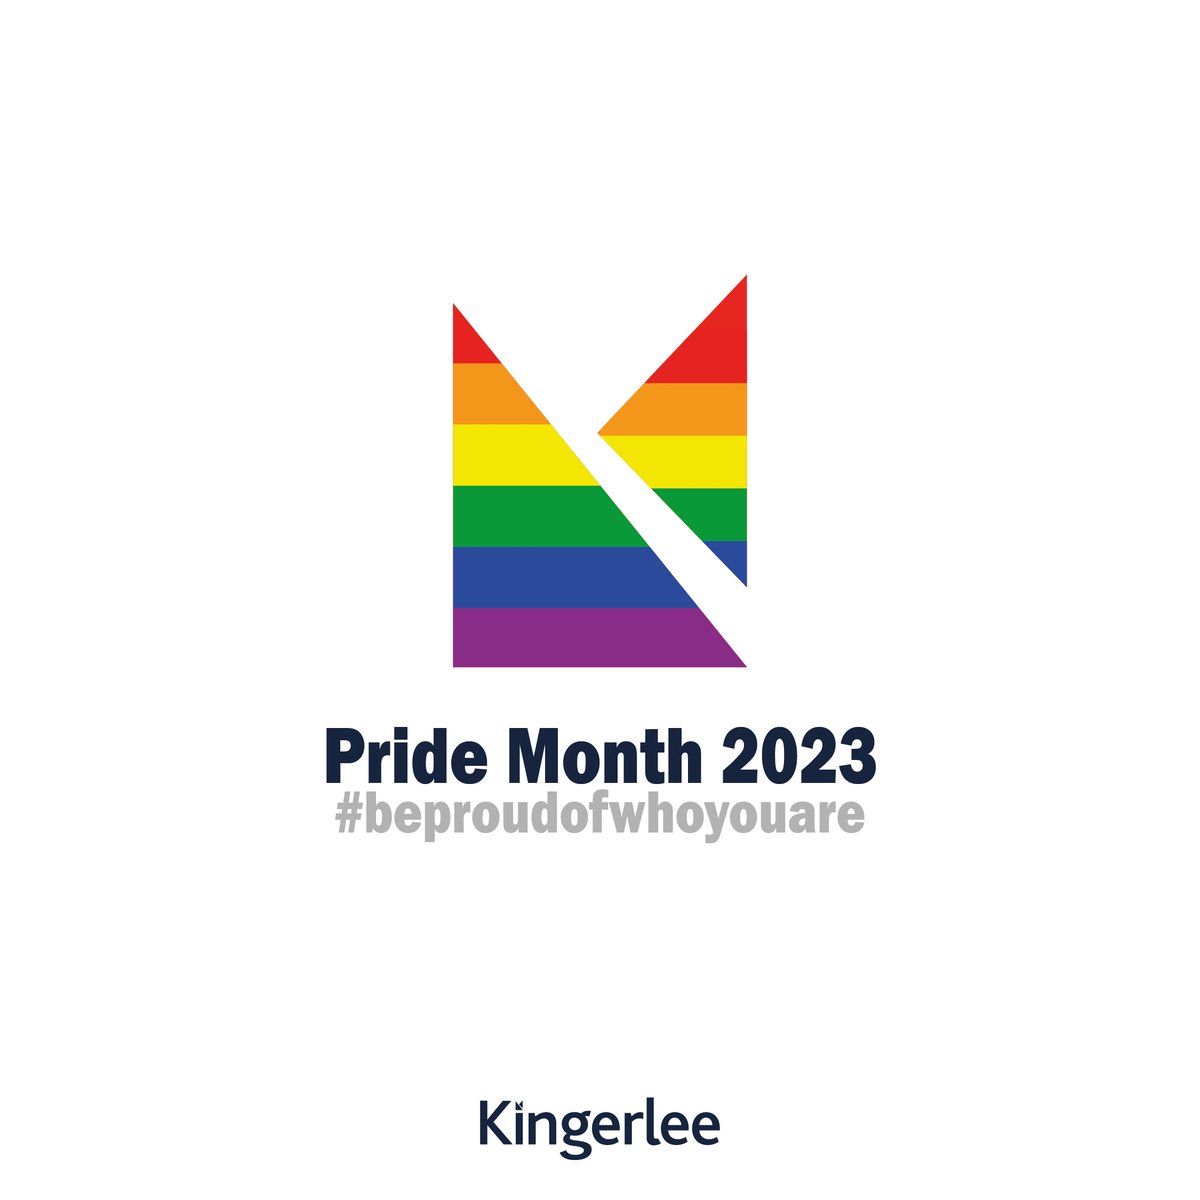 Celebrating Pride Month 2023 - We stand together 🏳️‍🌈 #beproudofwhoyouare #pridemonth2023 #westandtogether